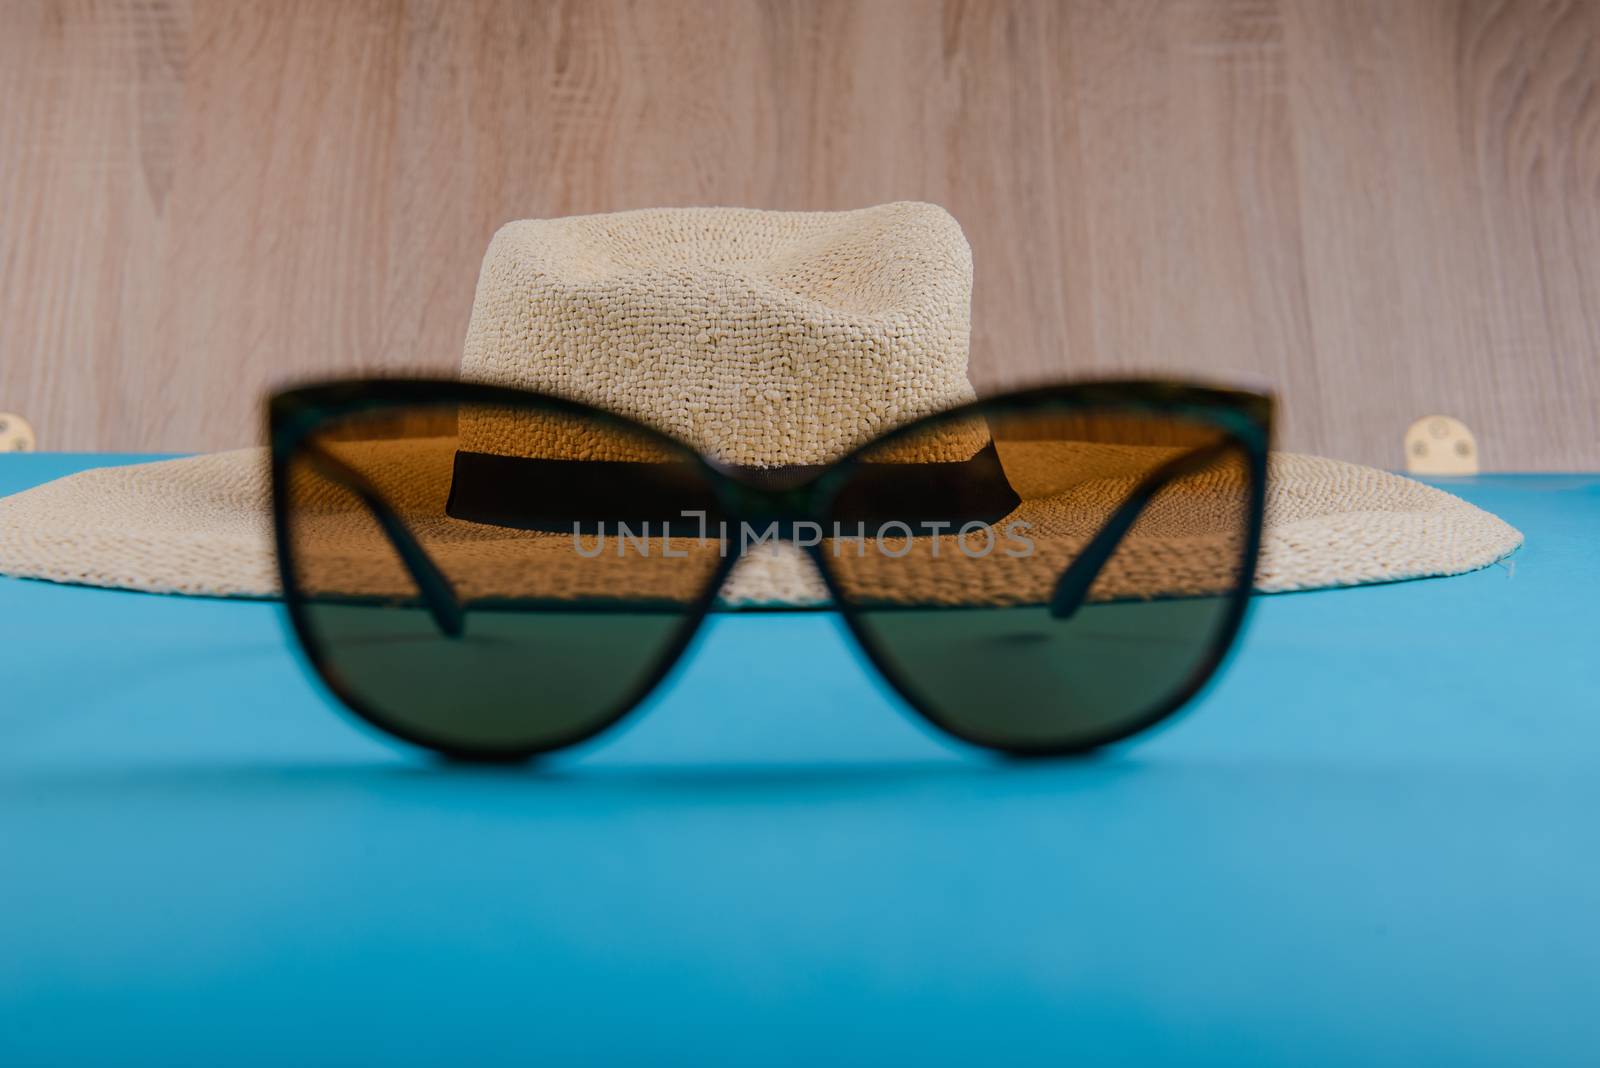 Straw hat and sunglasses on blue background. beach equipment.